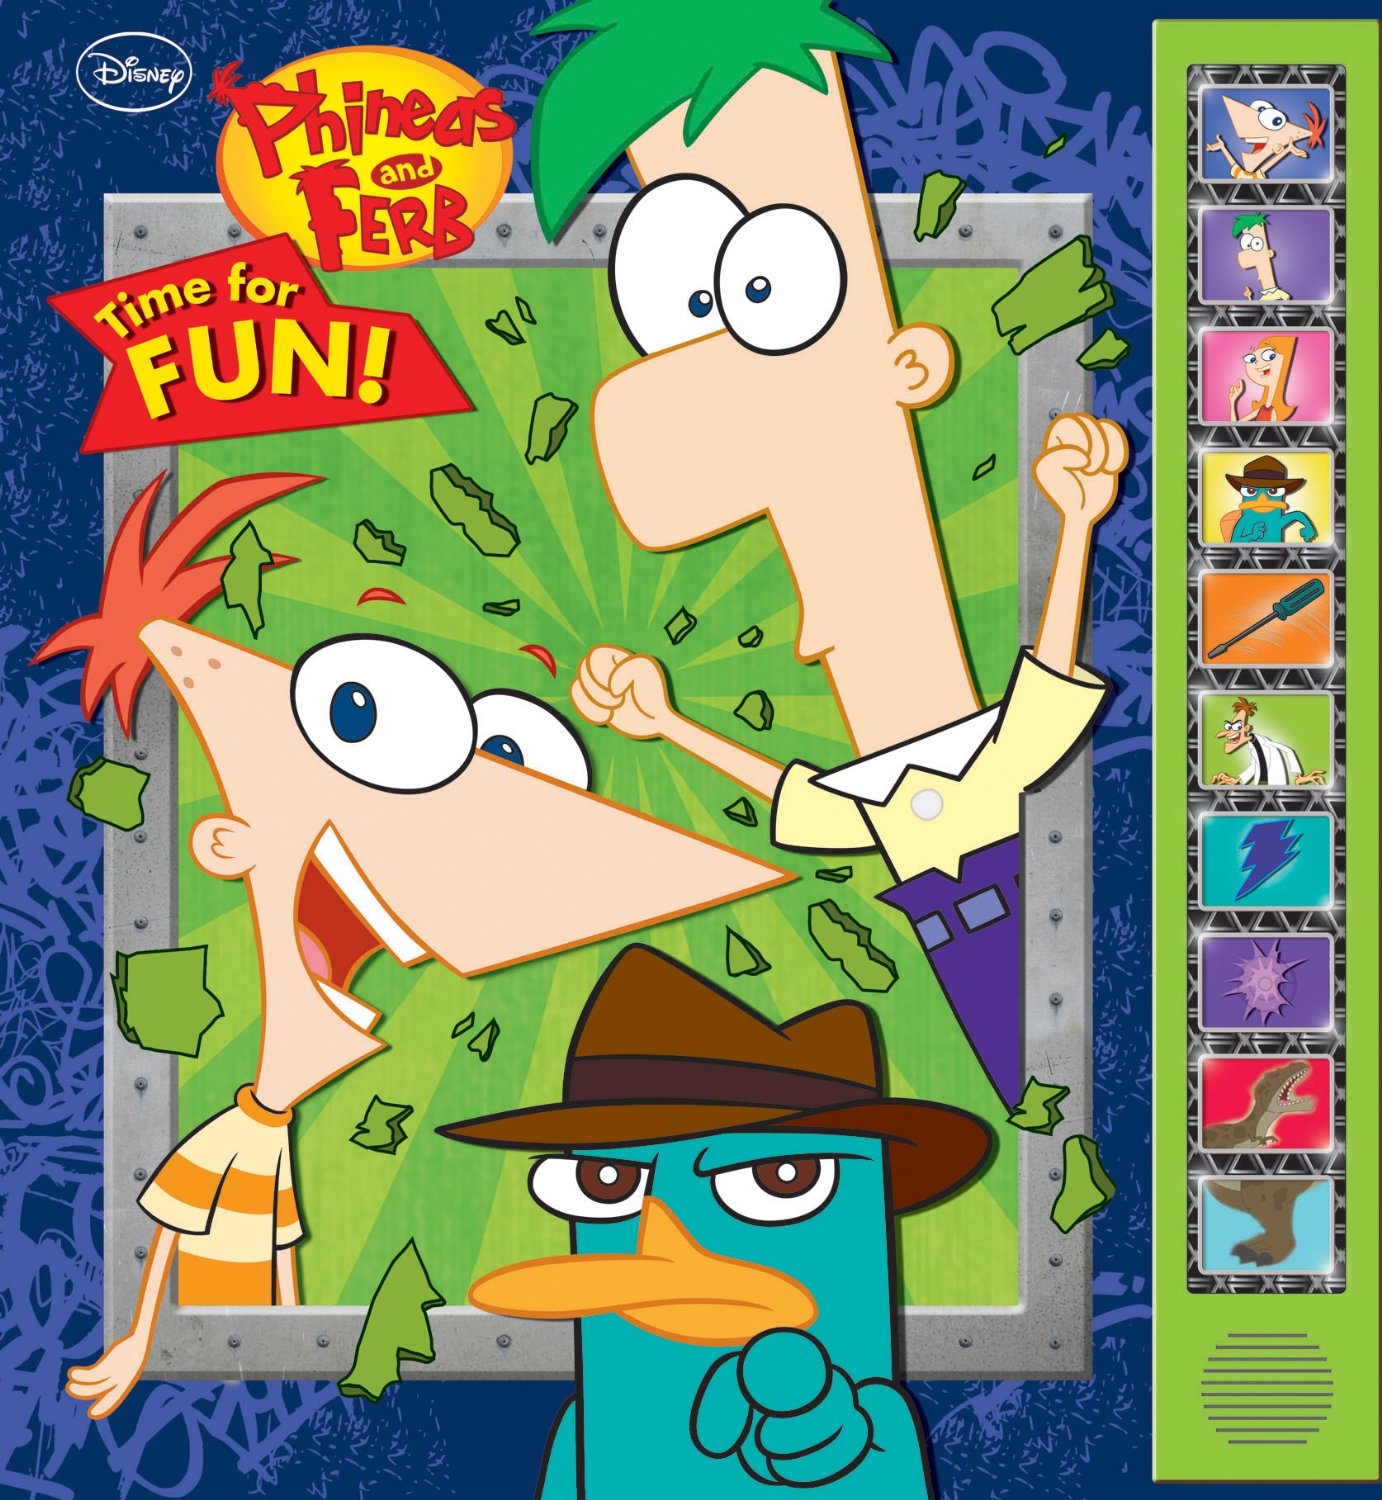 Time for Fun! | Phineas and Ferb Wiki | Fandom powered by Wikia